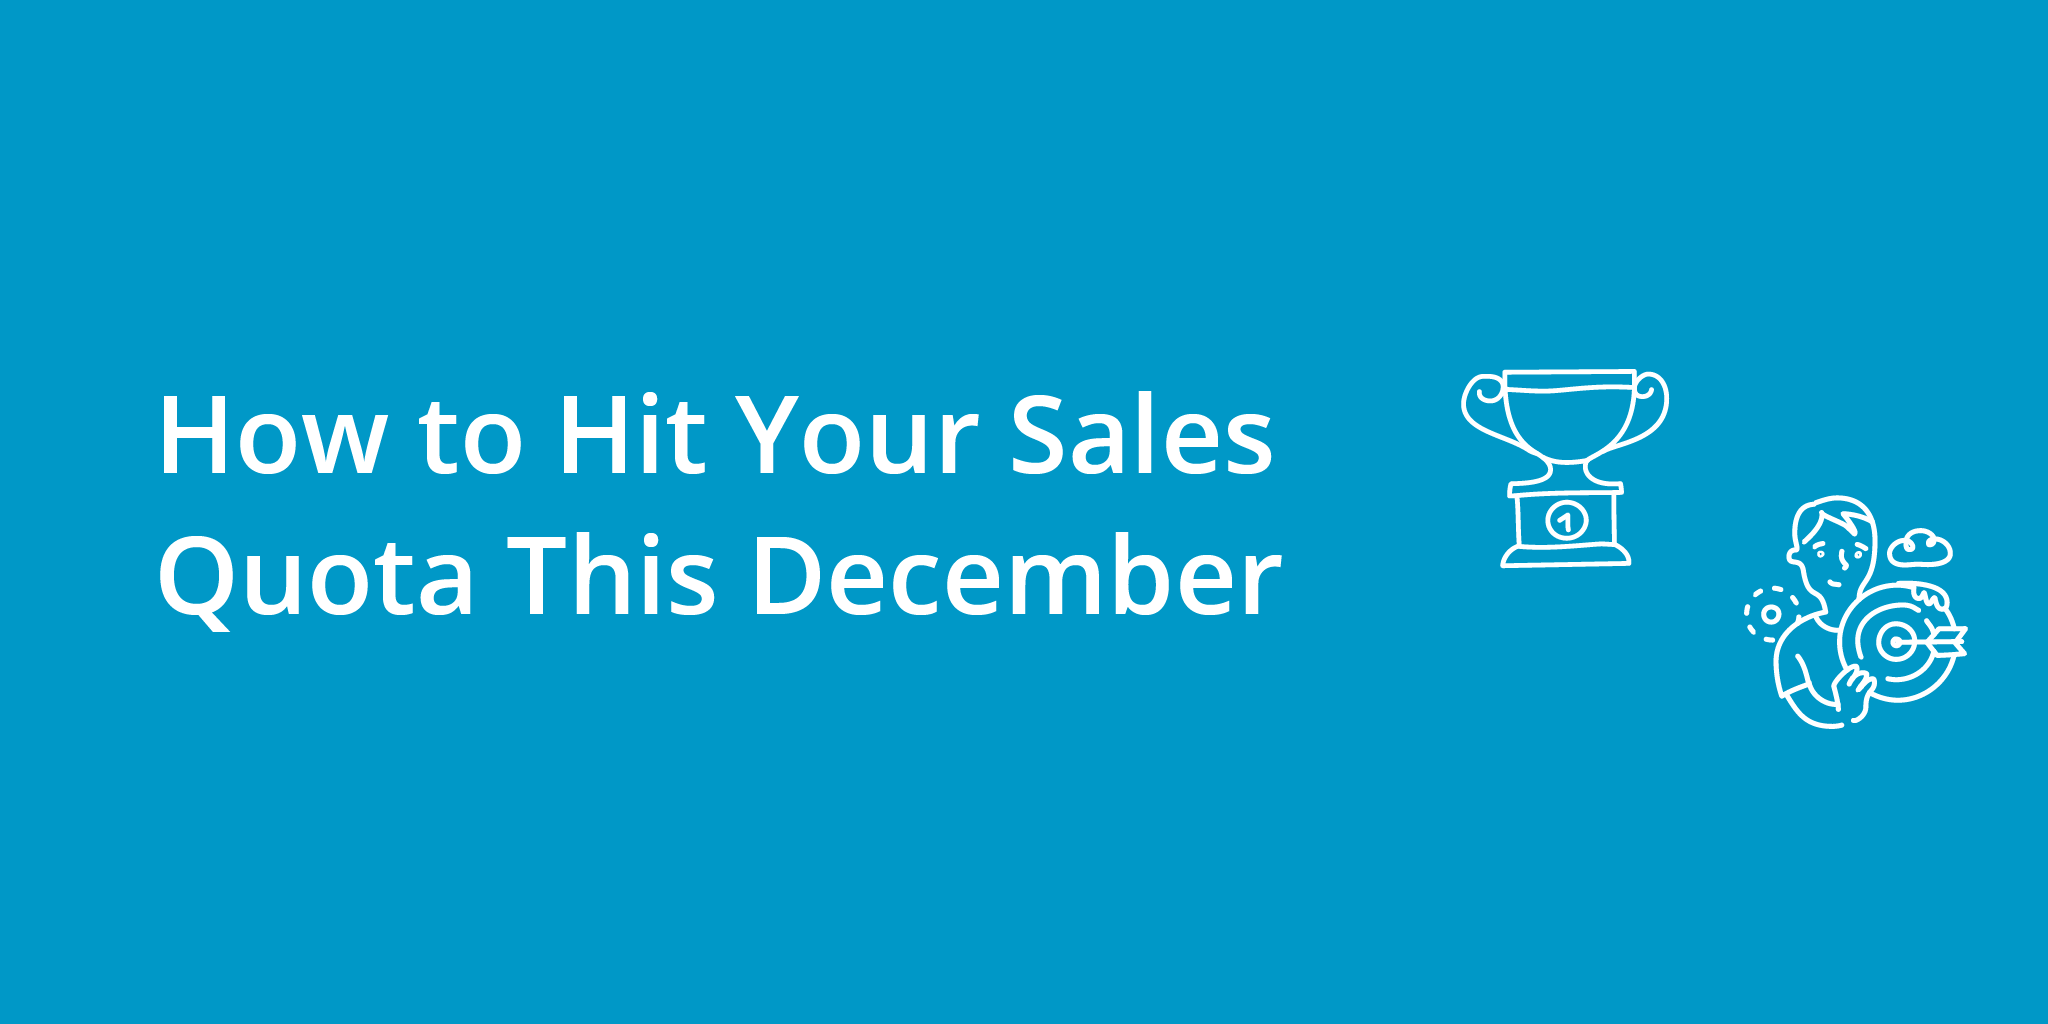 How to Hit Your Sales Quota This December